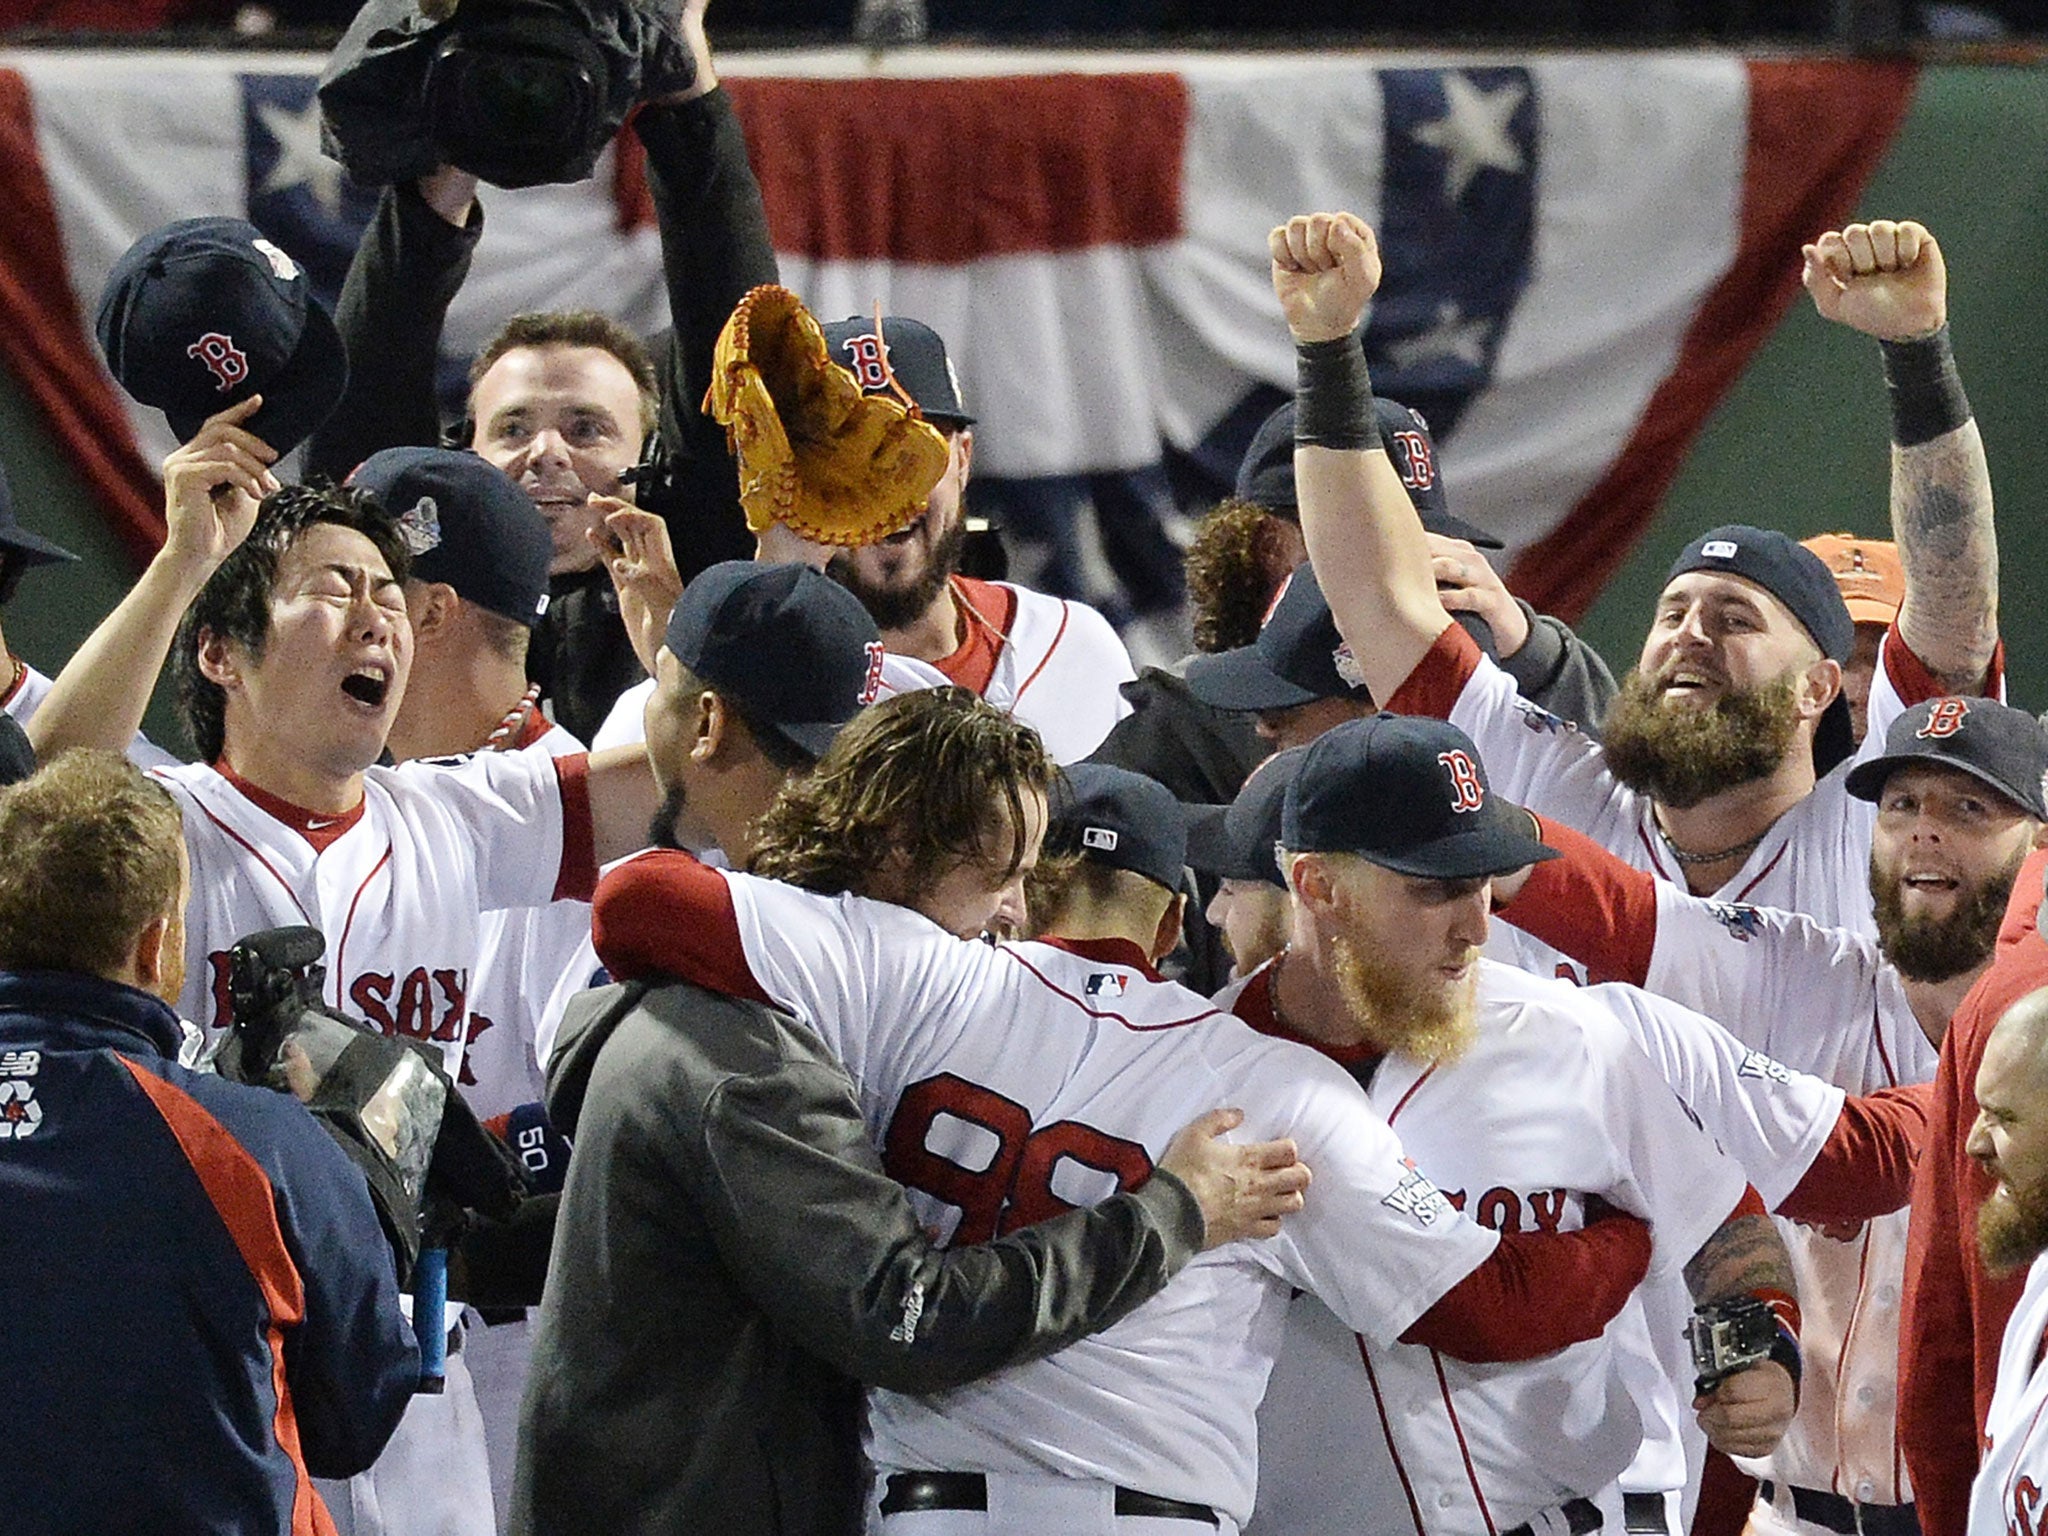 The Boston Red Sox celebrate winning the World Series at their home, Fenway Park